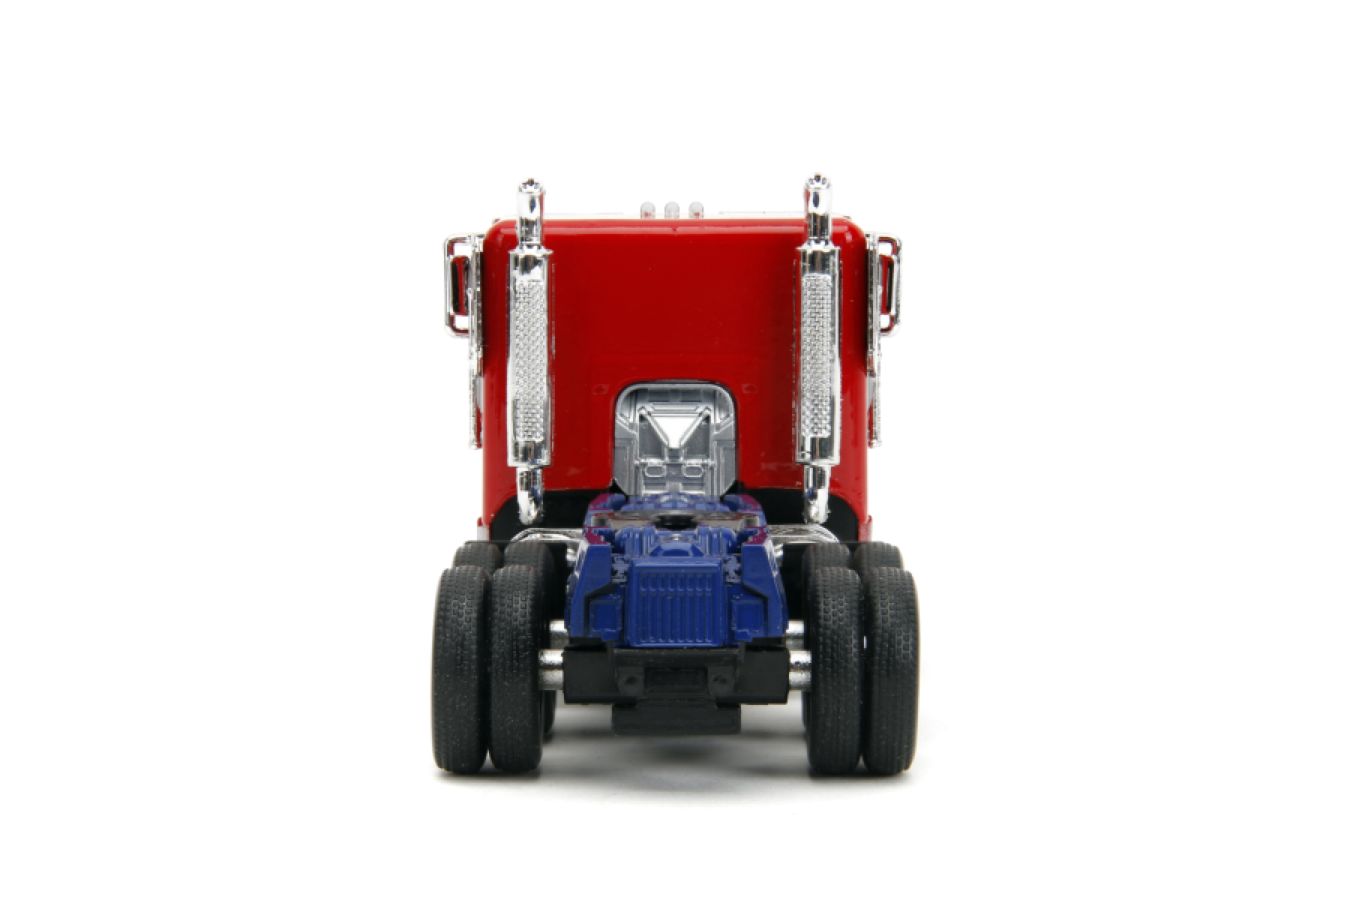 Transformers: Rise of the Beasts - Optimus Prime 1:32 Scale Vehicle